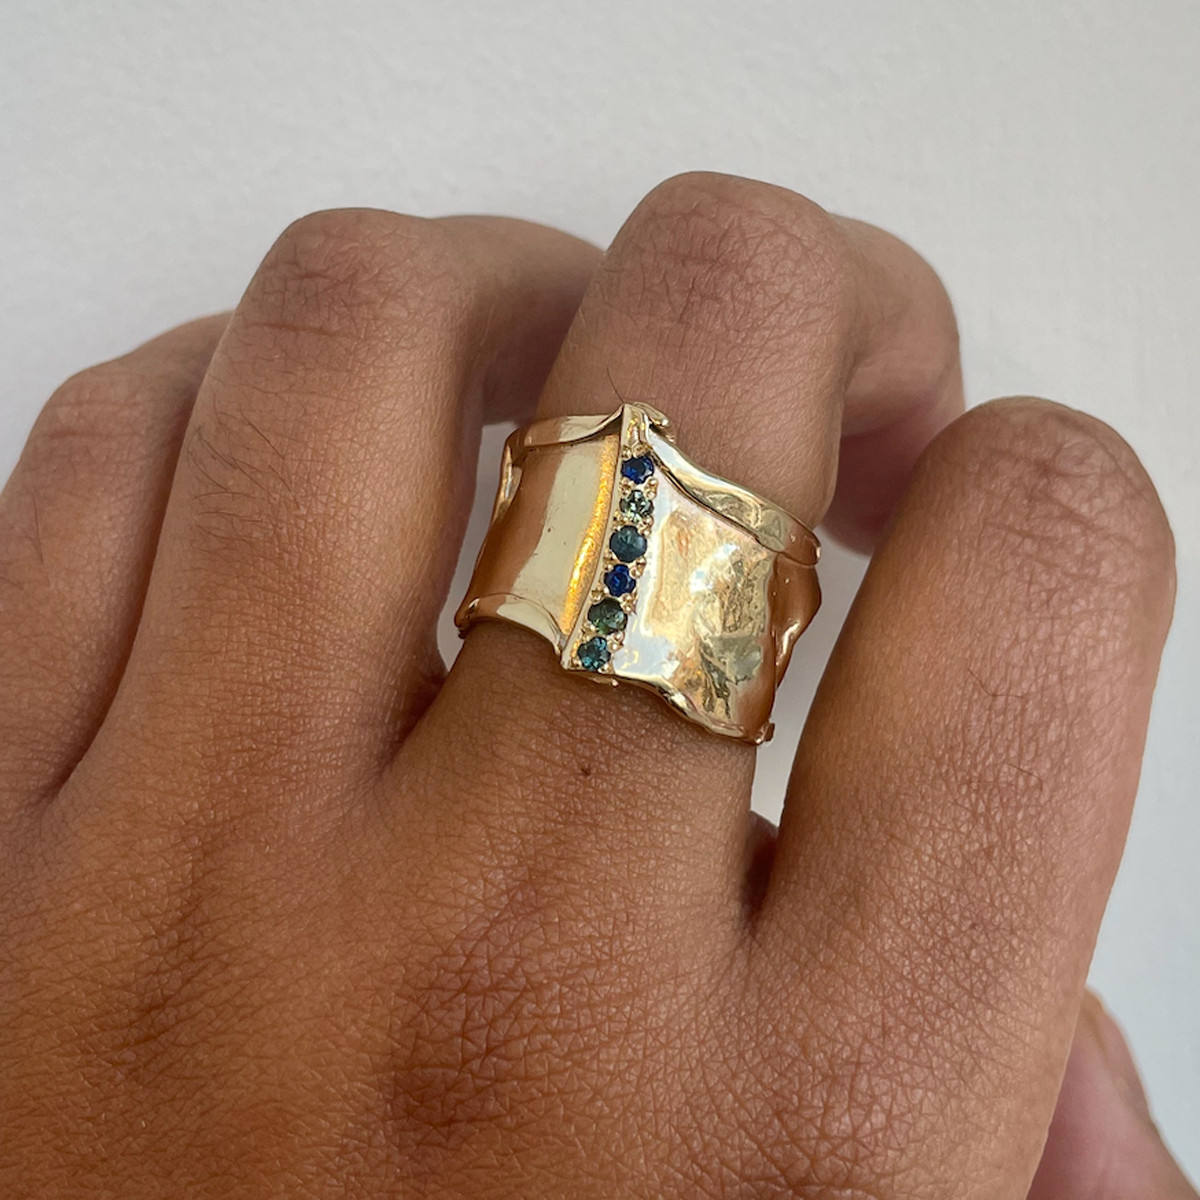 The Athena no.2 Art Ring by Mia Chicco available at tomfoolery London as a part of Art Ring 2022 exhibition.